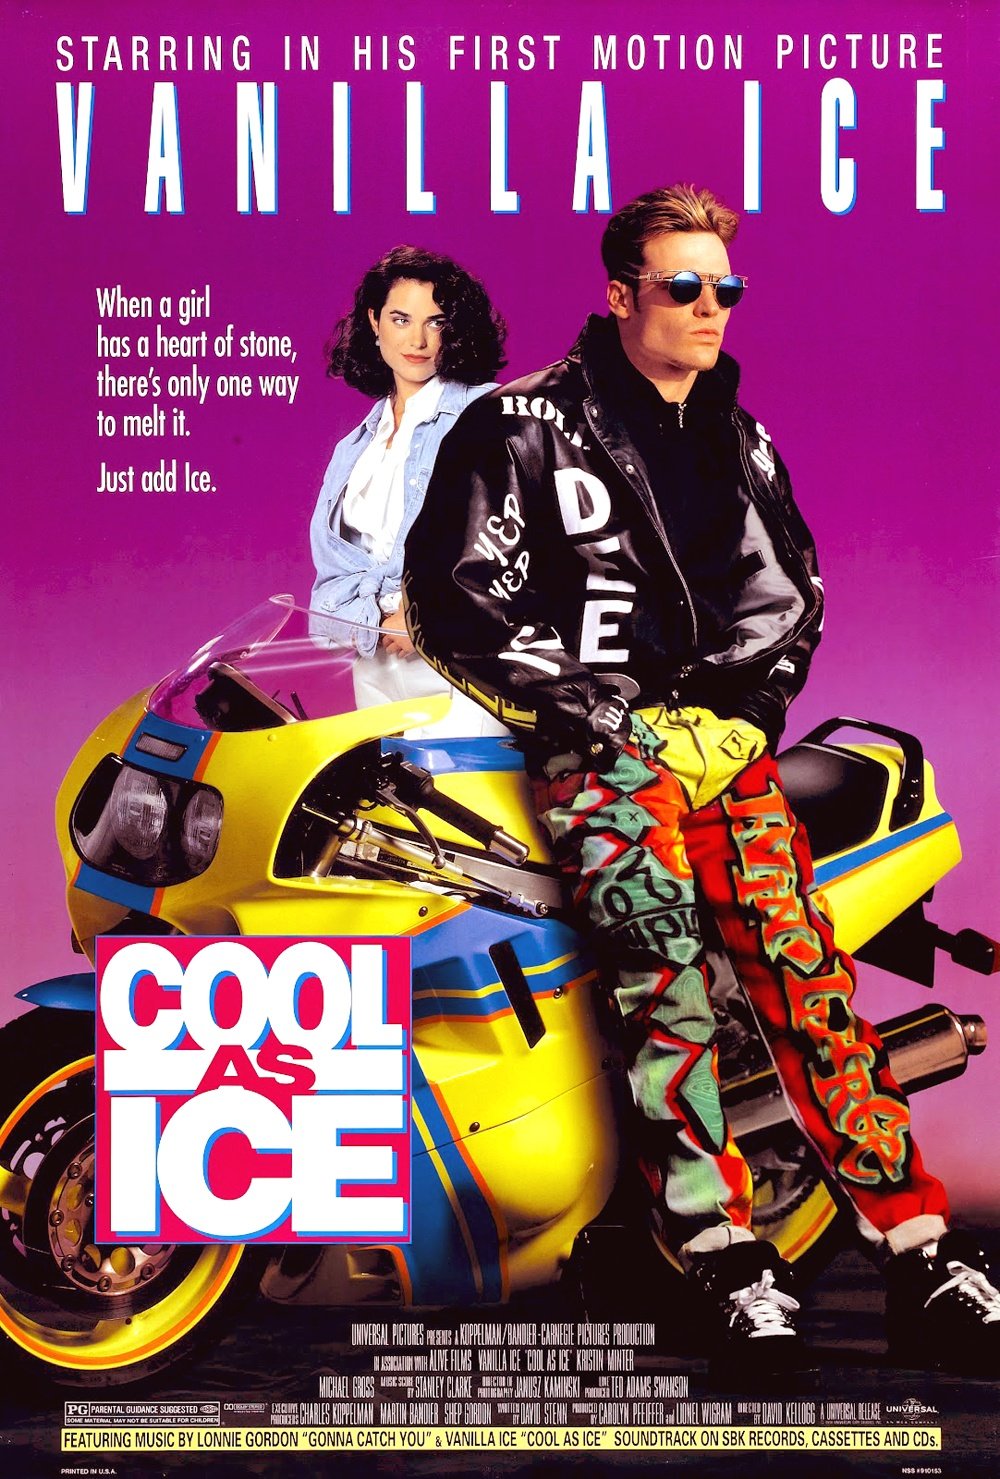 Movie poster for 'Cool As Ice' by Vanilla Ice